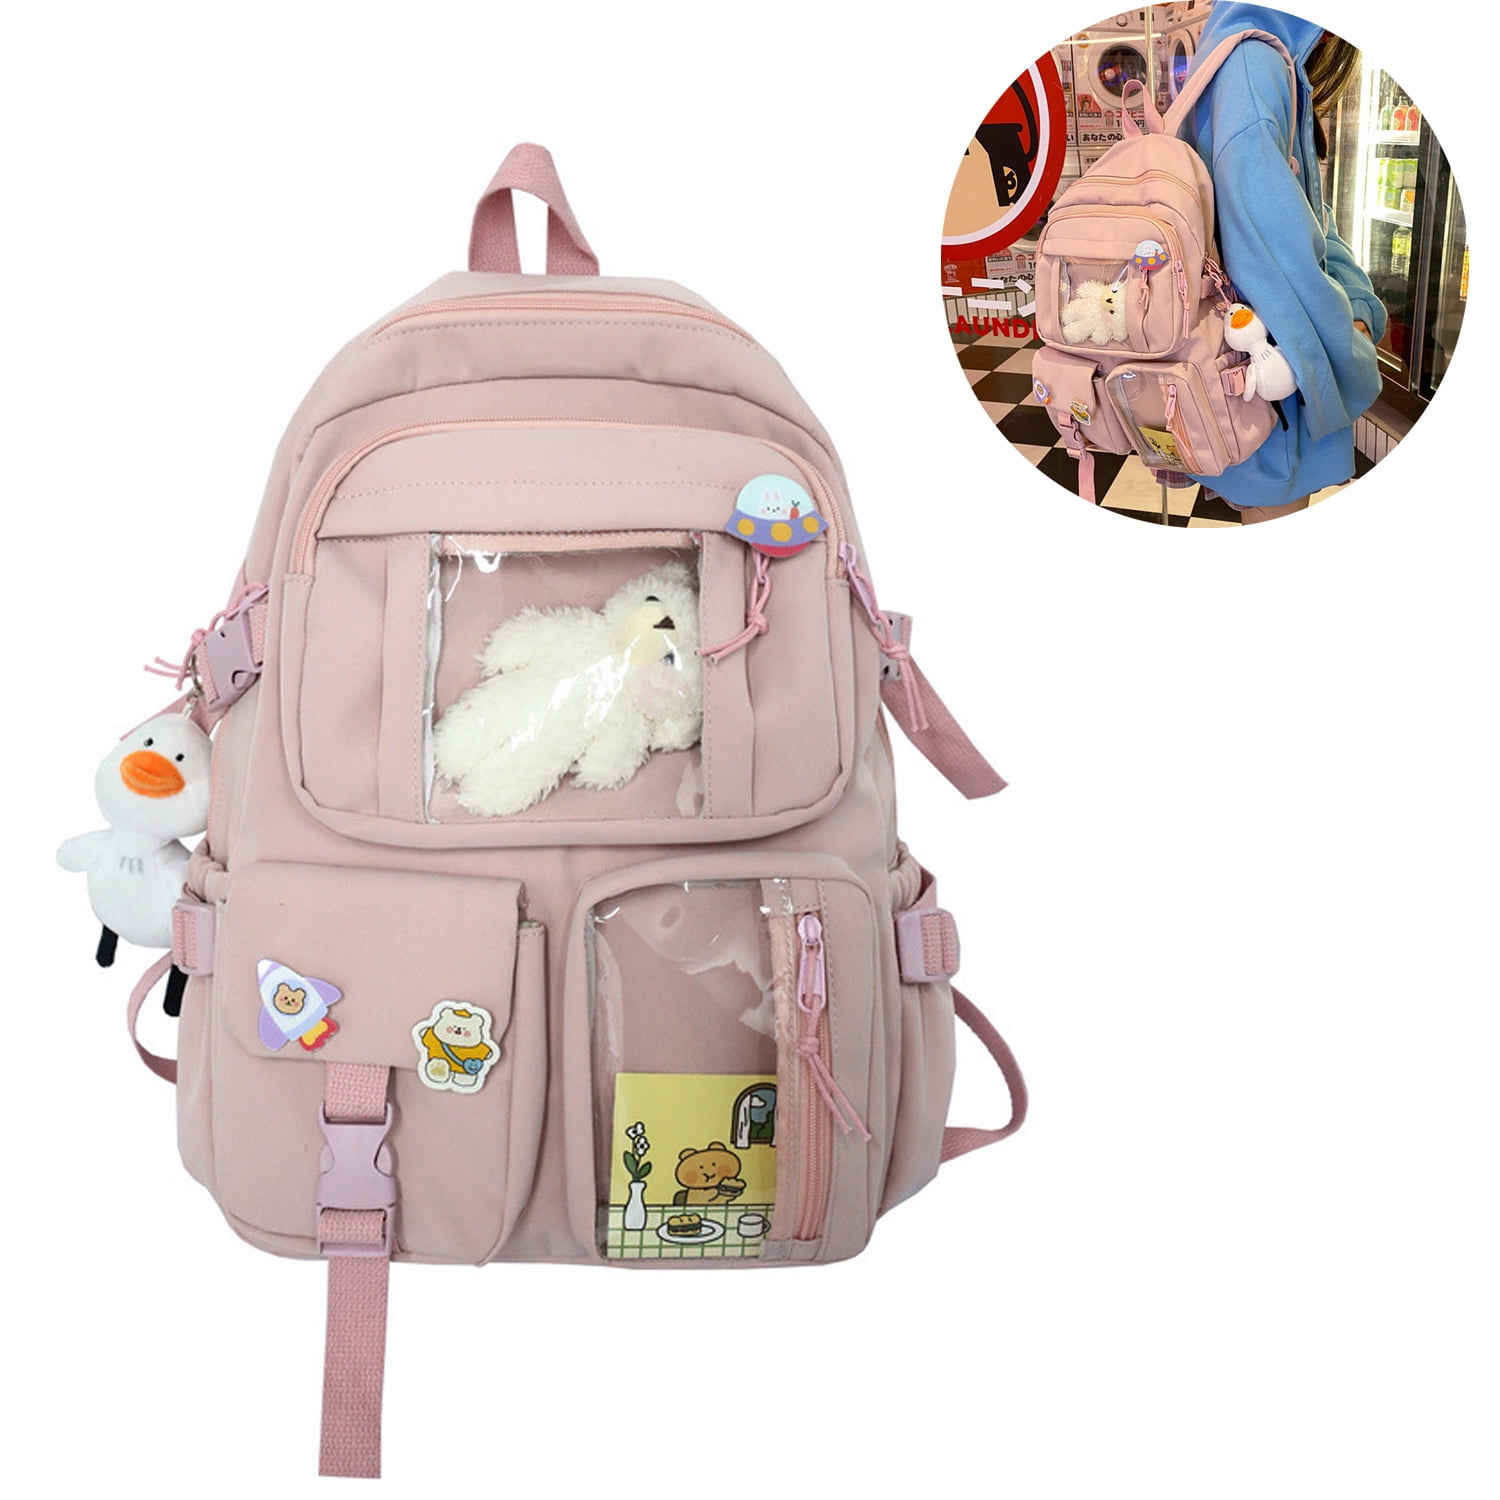 Women Backpack for Travel / Large Backpack With Zipper Pocket 